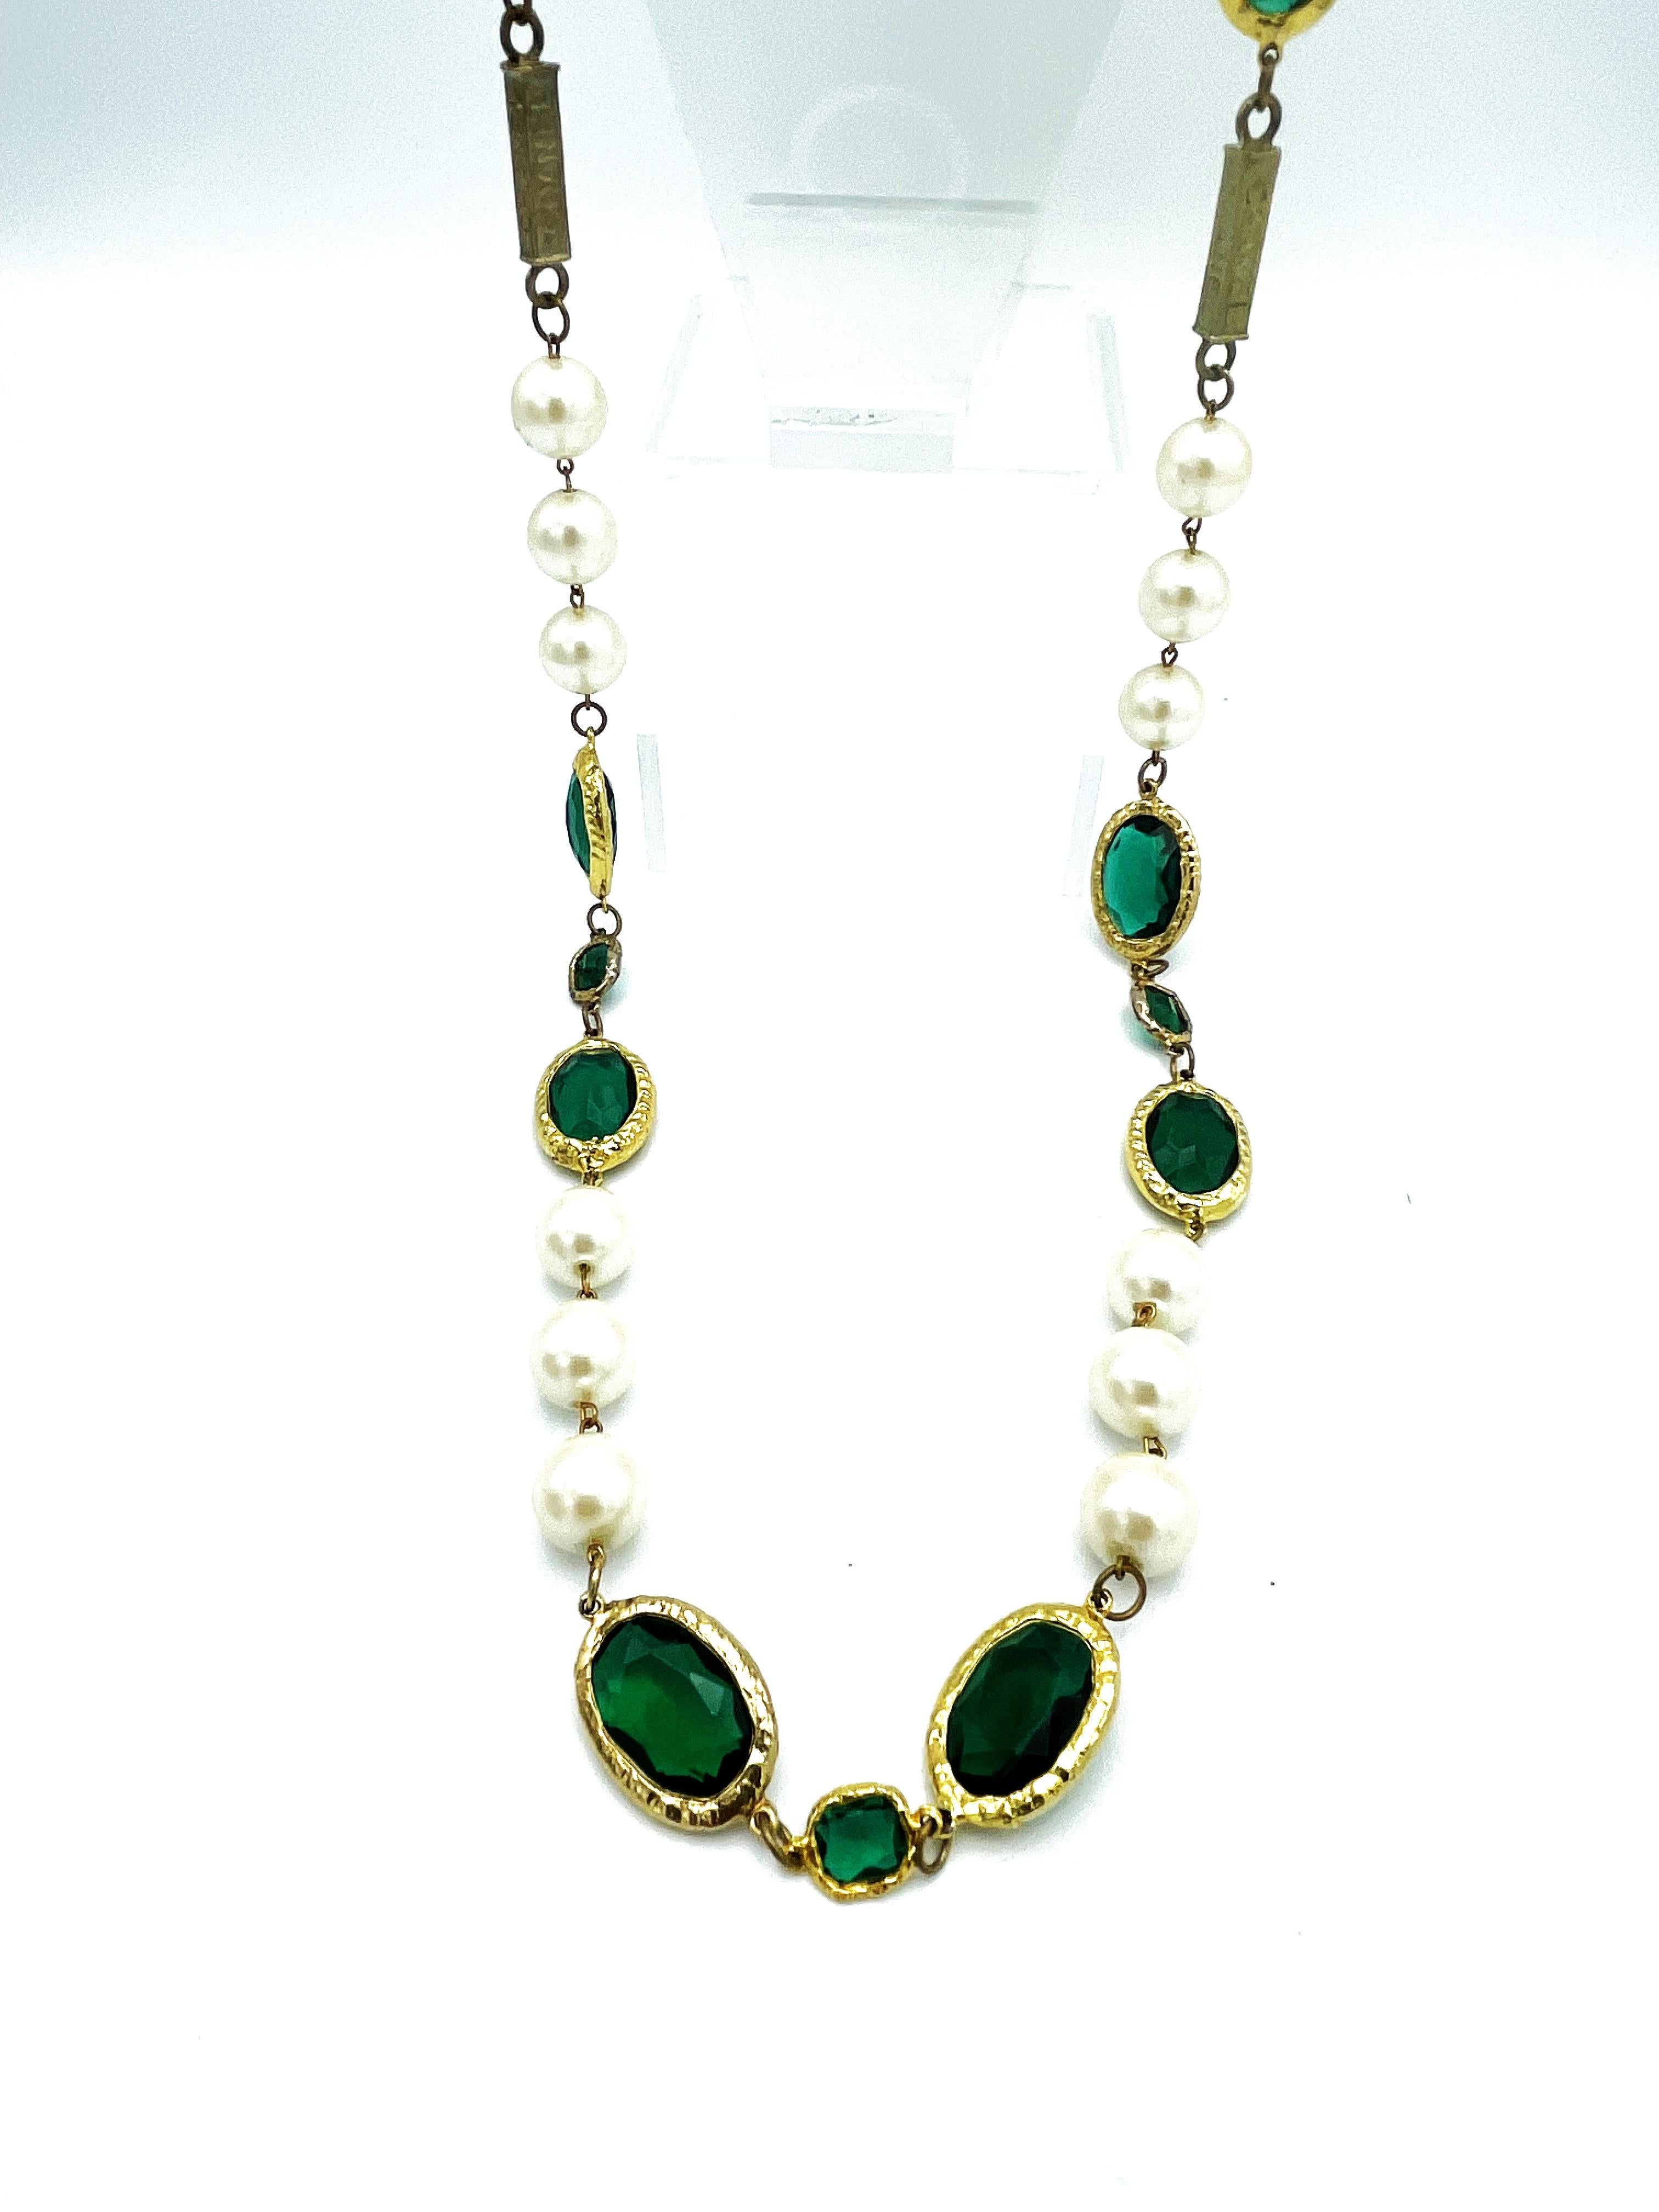 This rare long Chanel necklace or Sautoir consists of 18 large and well-preserved artificial pearls. 
In between 12 large oval green rhinestones from Swarovski with different cuts on each side, which are set in 24 carat gold. 
Between each two large